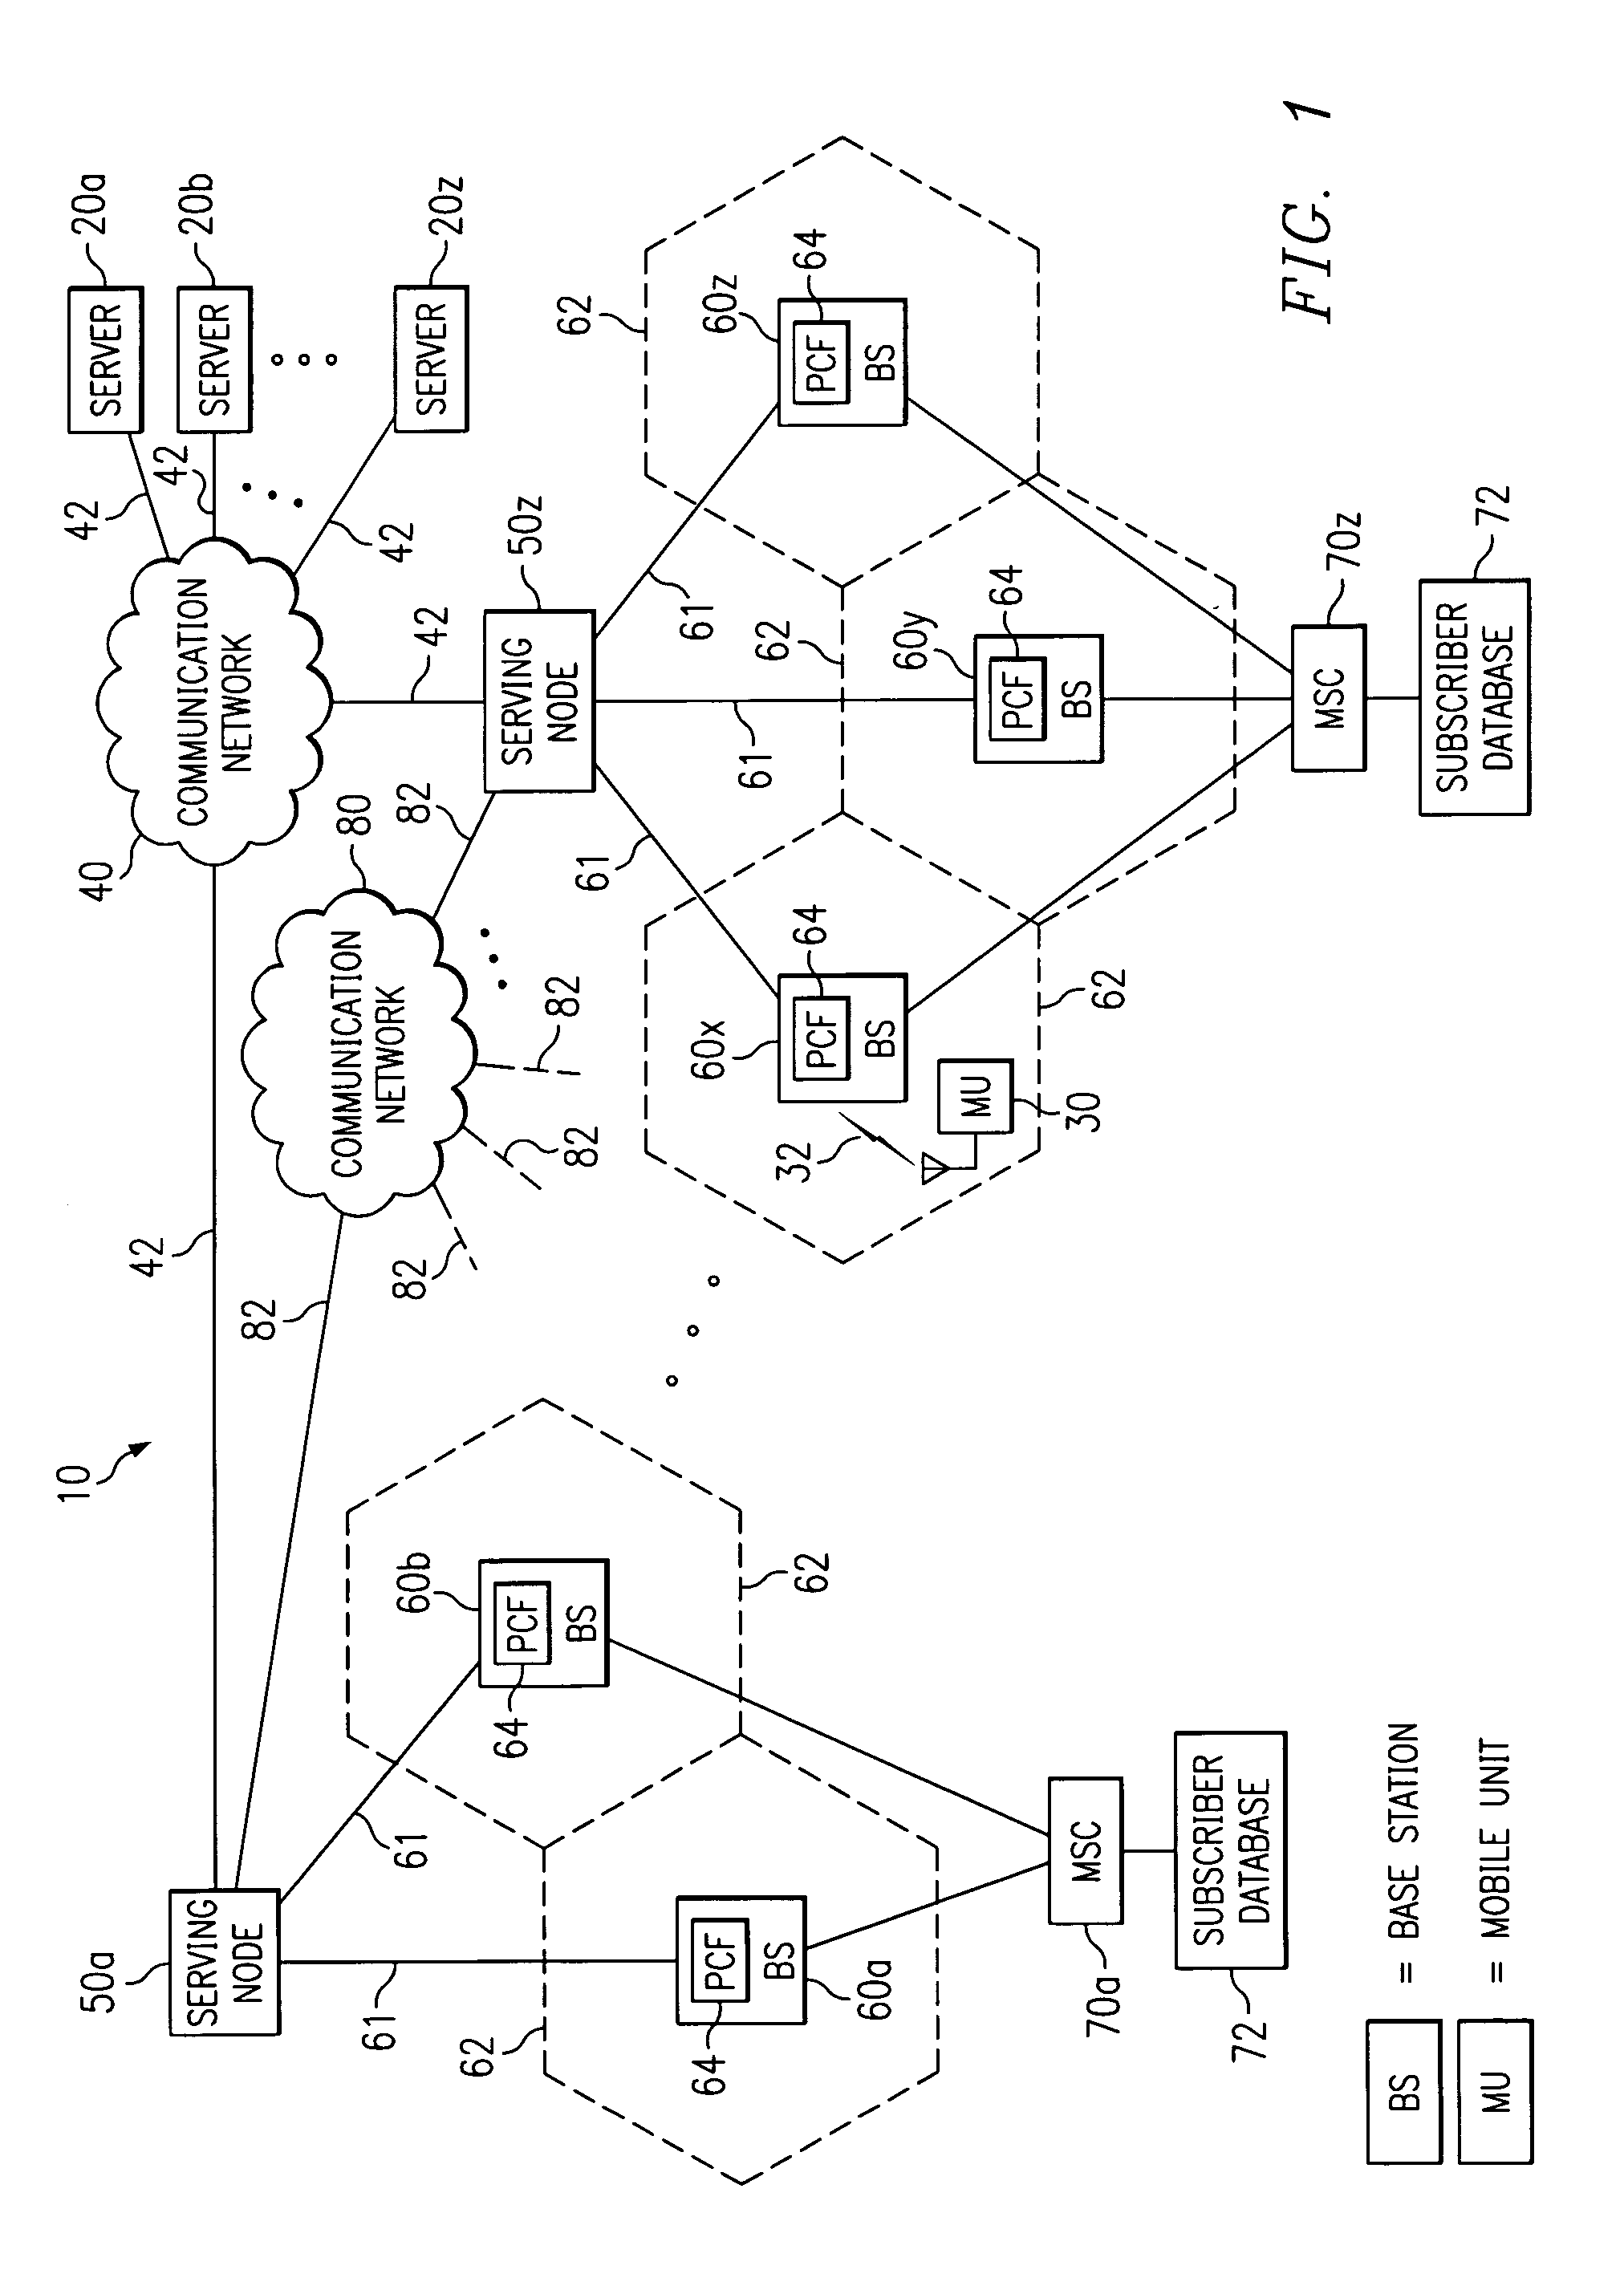 System and method for selecting a wireless serving node